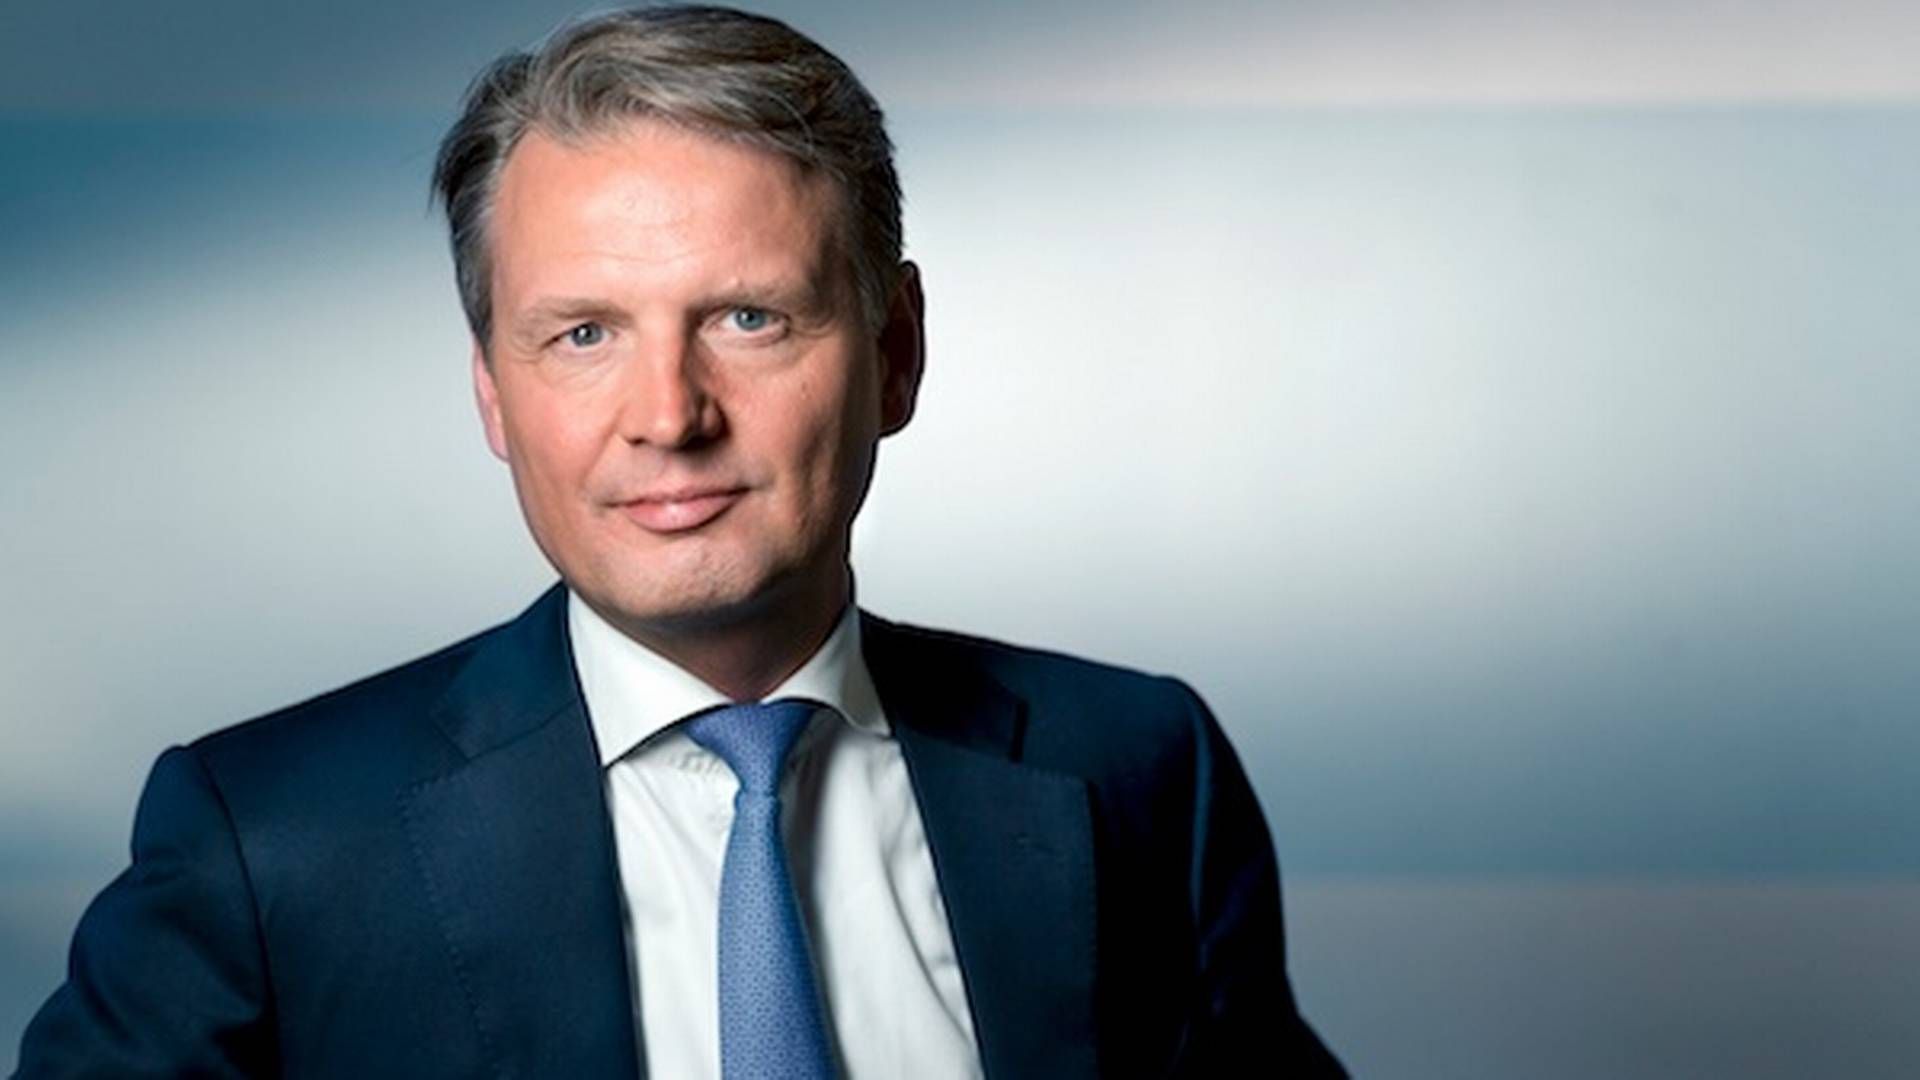 Henrik Ramskov is one of four partners in the ownership circle behind Navigare Capital Partners, which has several Danish pensions funds as investors. | Photo: Pr / Navigare Capital Partners